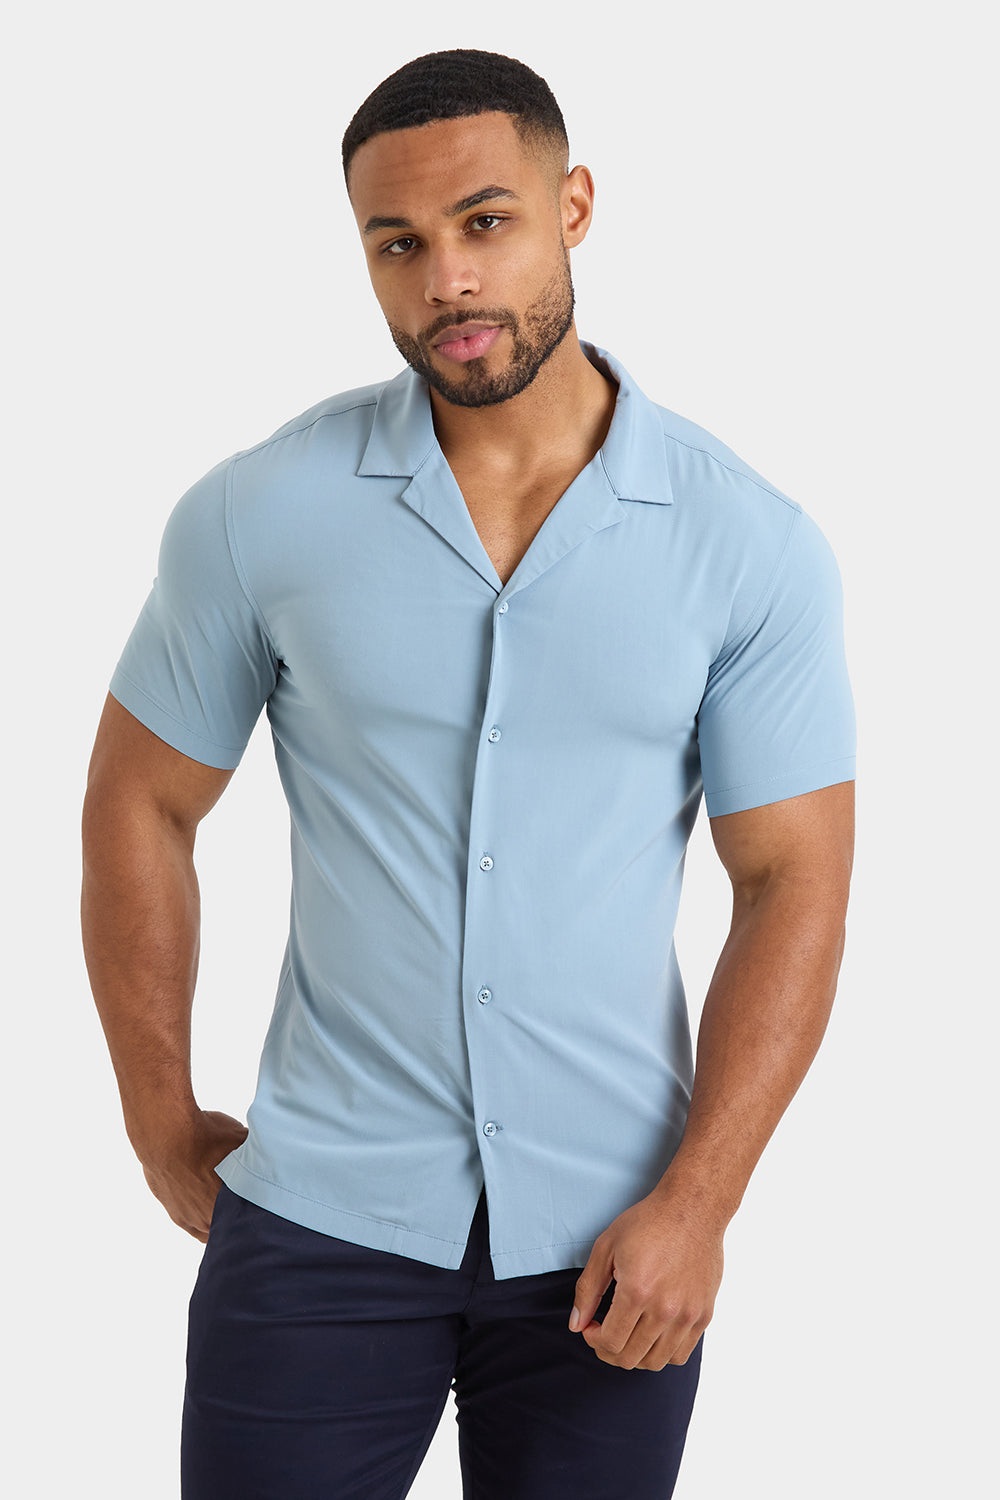 Muscle Fit Short Sleeve Viscose Shirt in Slate Grey - TAILORED ATHLETE - ROW